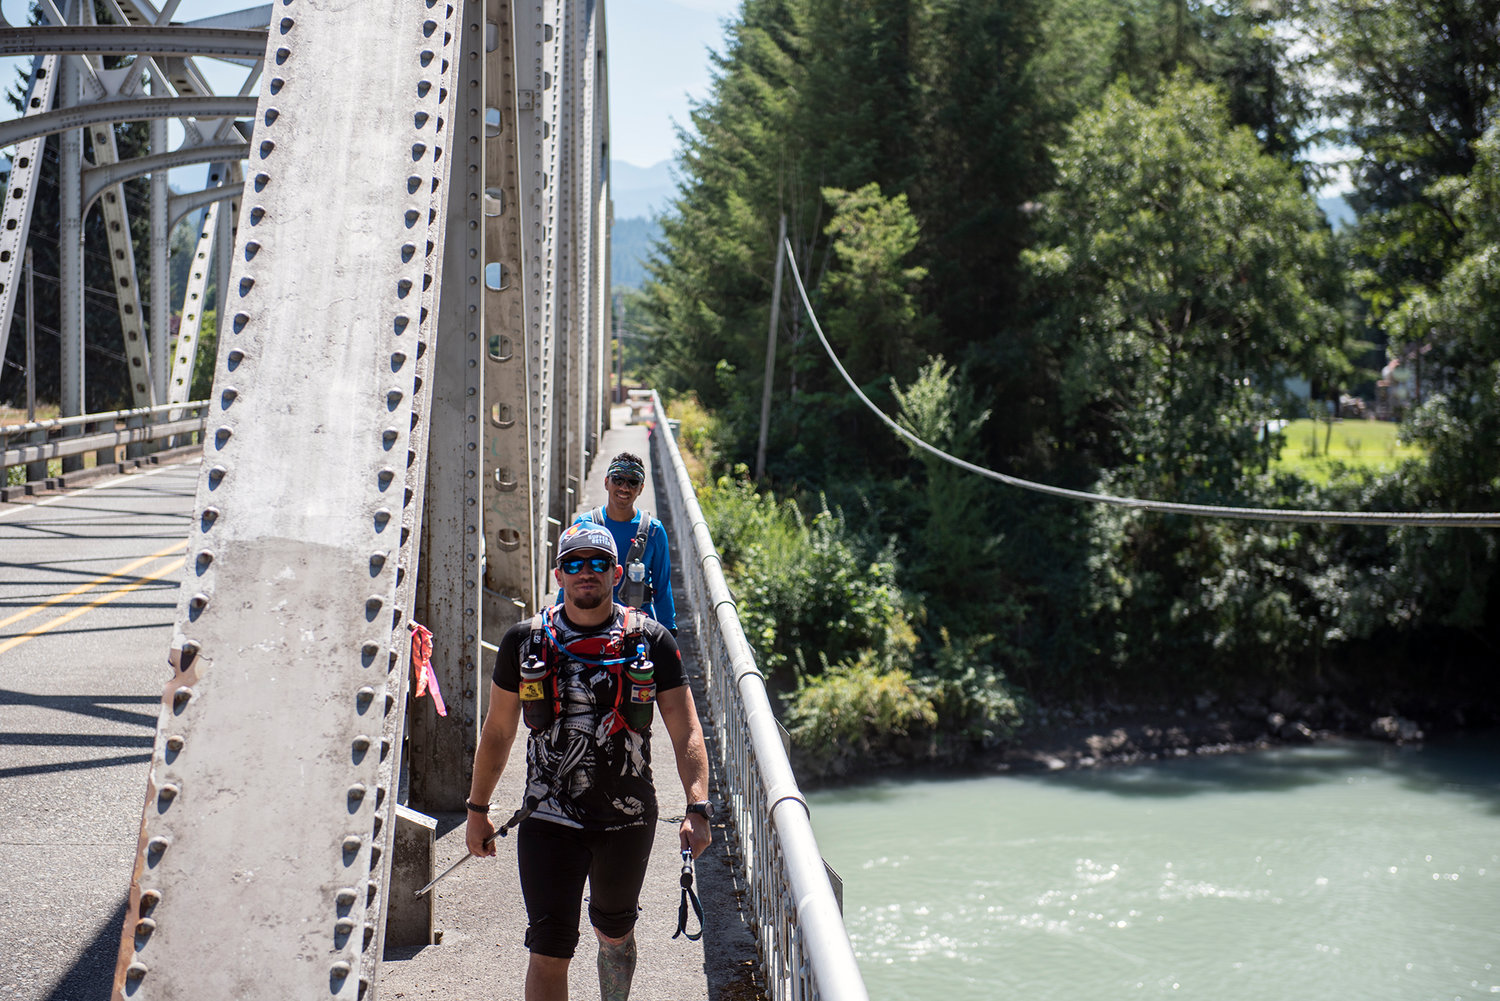 Lucas Rivers (front) and Alfonso Juarez cross the Highway 131 Bridge into Randle on Tuesday as they finished the final few miles of their 206.5 mile journey in the Bigfoot 200 race.